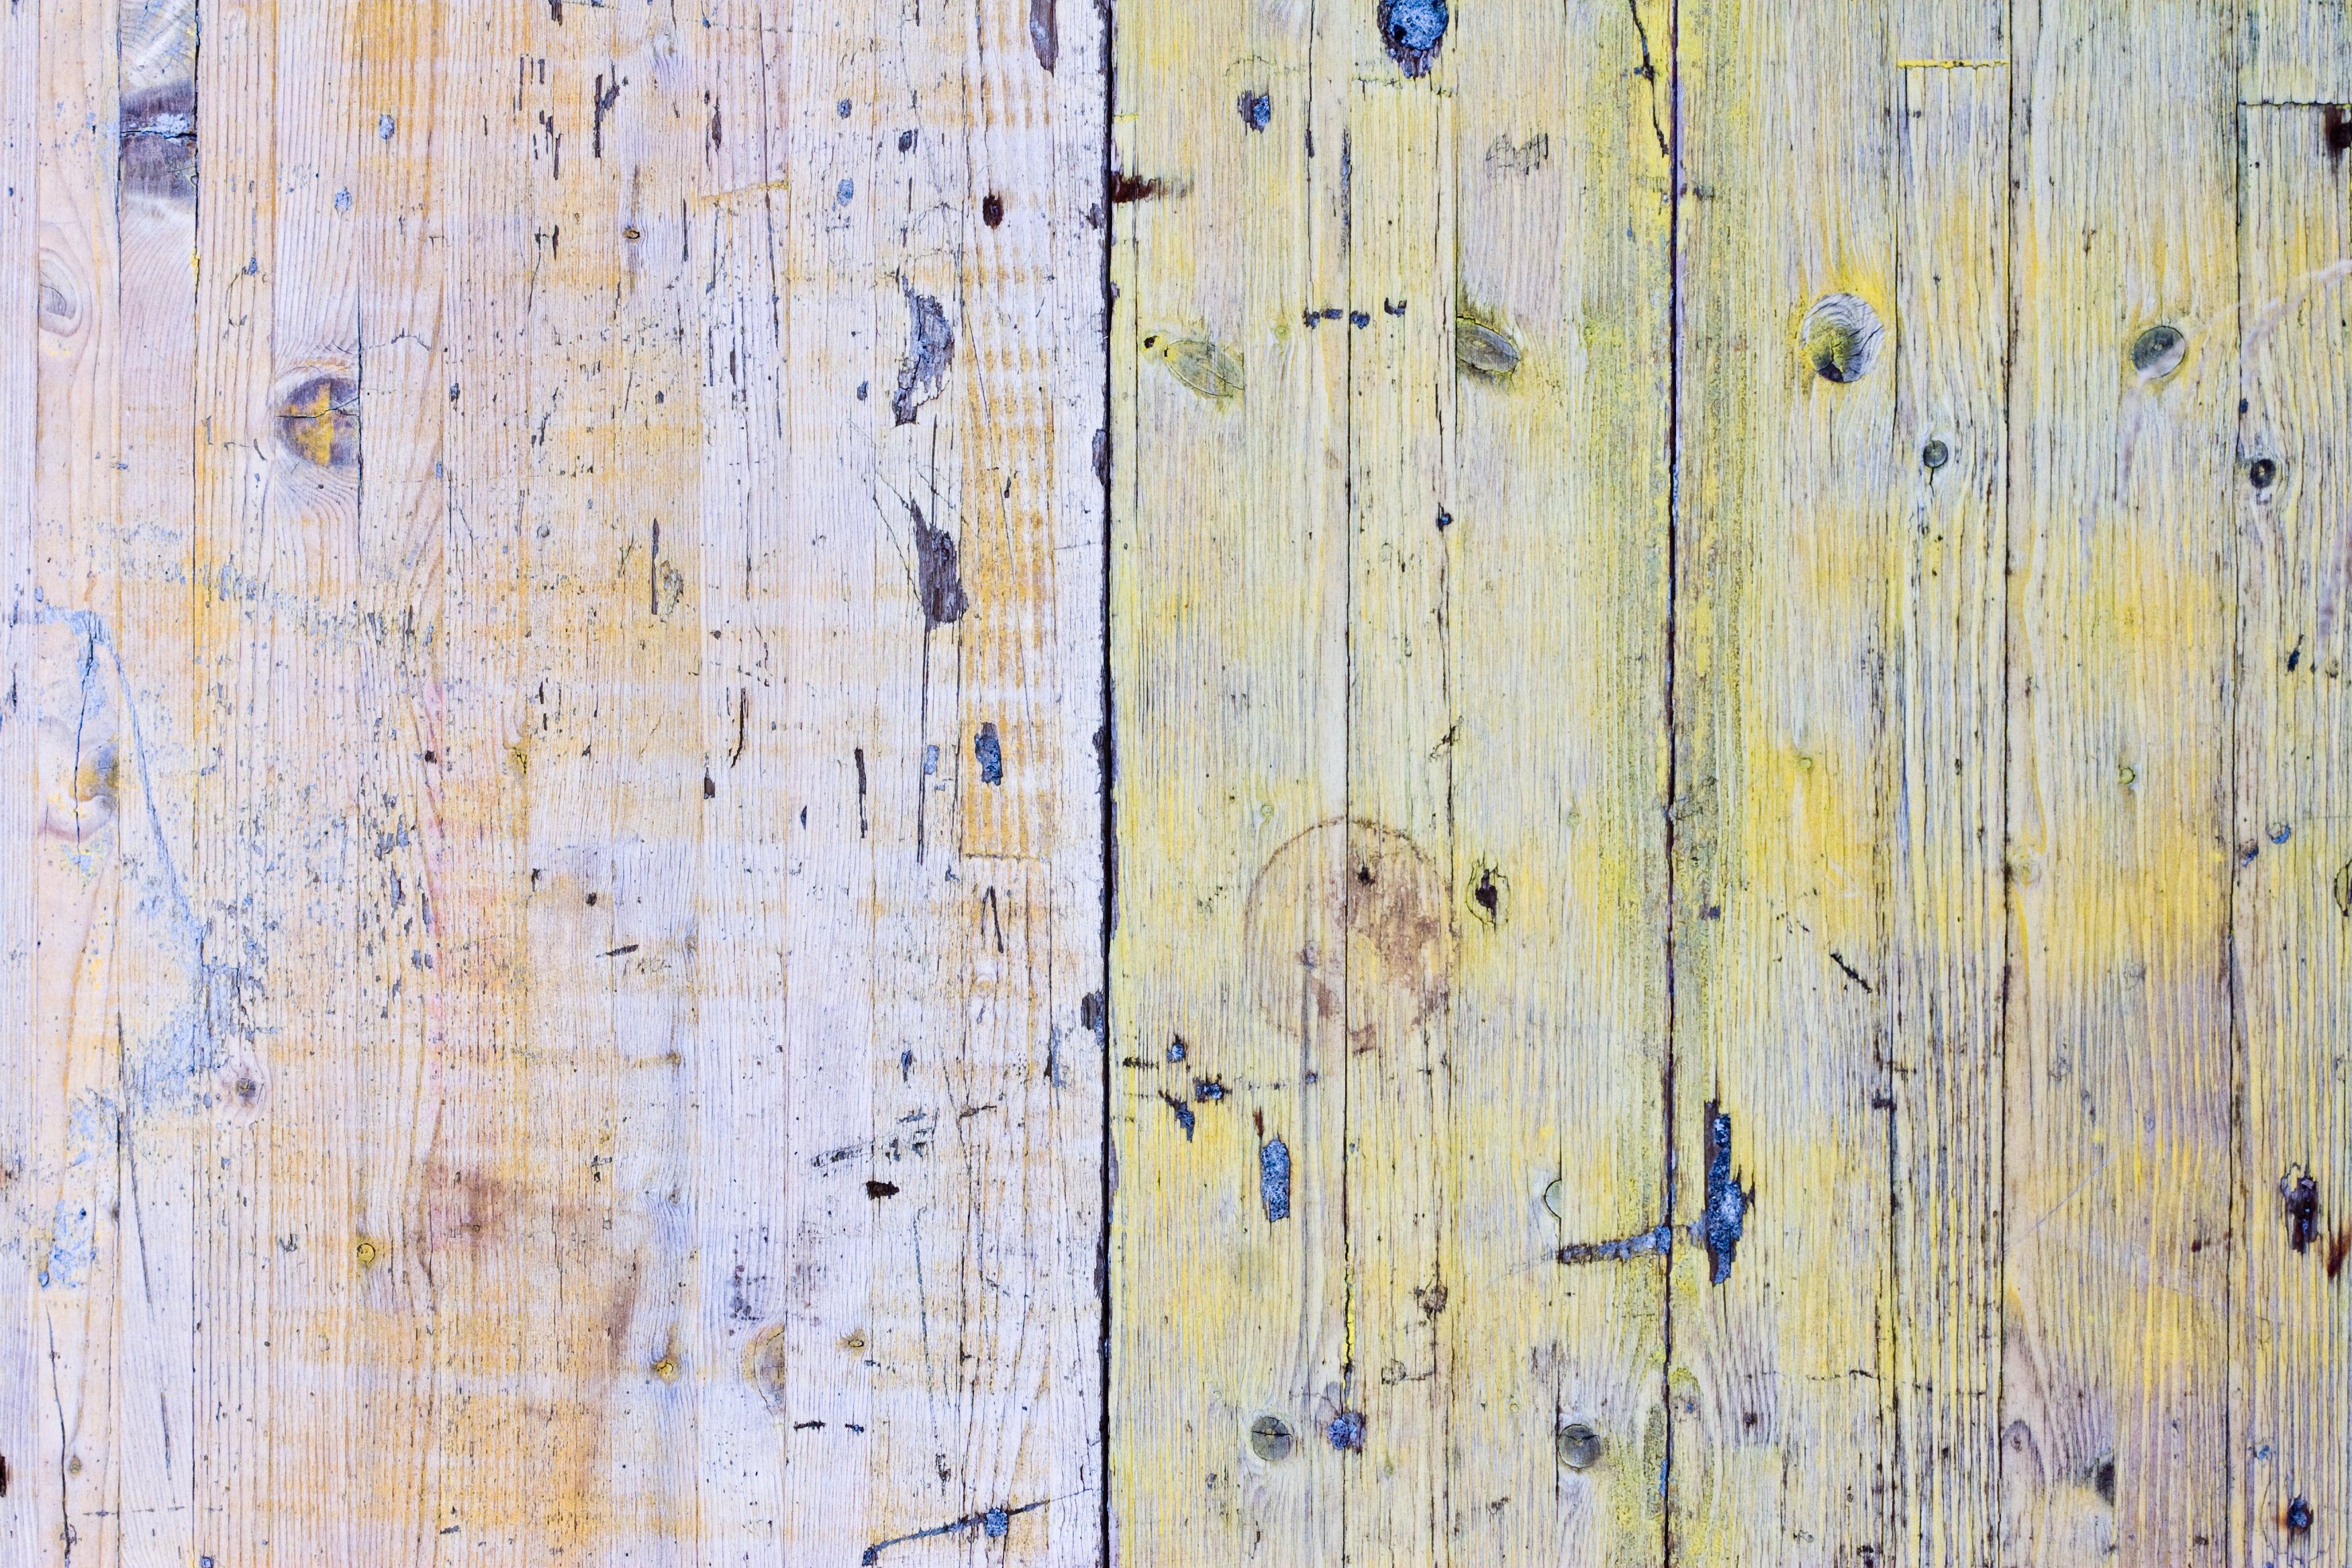 Worn Wood Texture, Dirty, Industrial, Plywood, Texture, HQ Photo